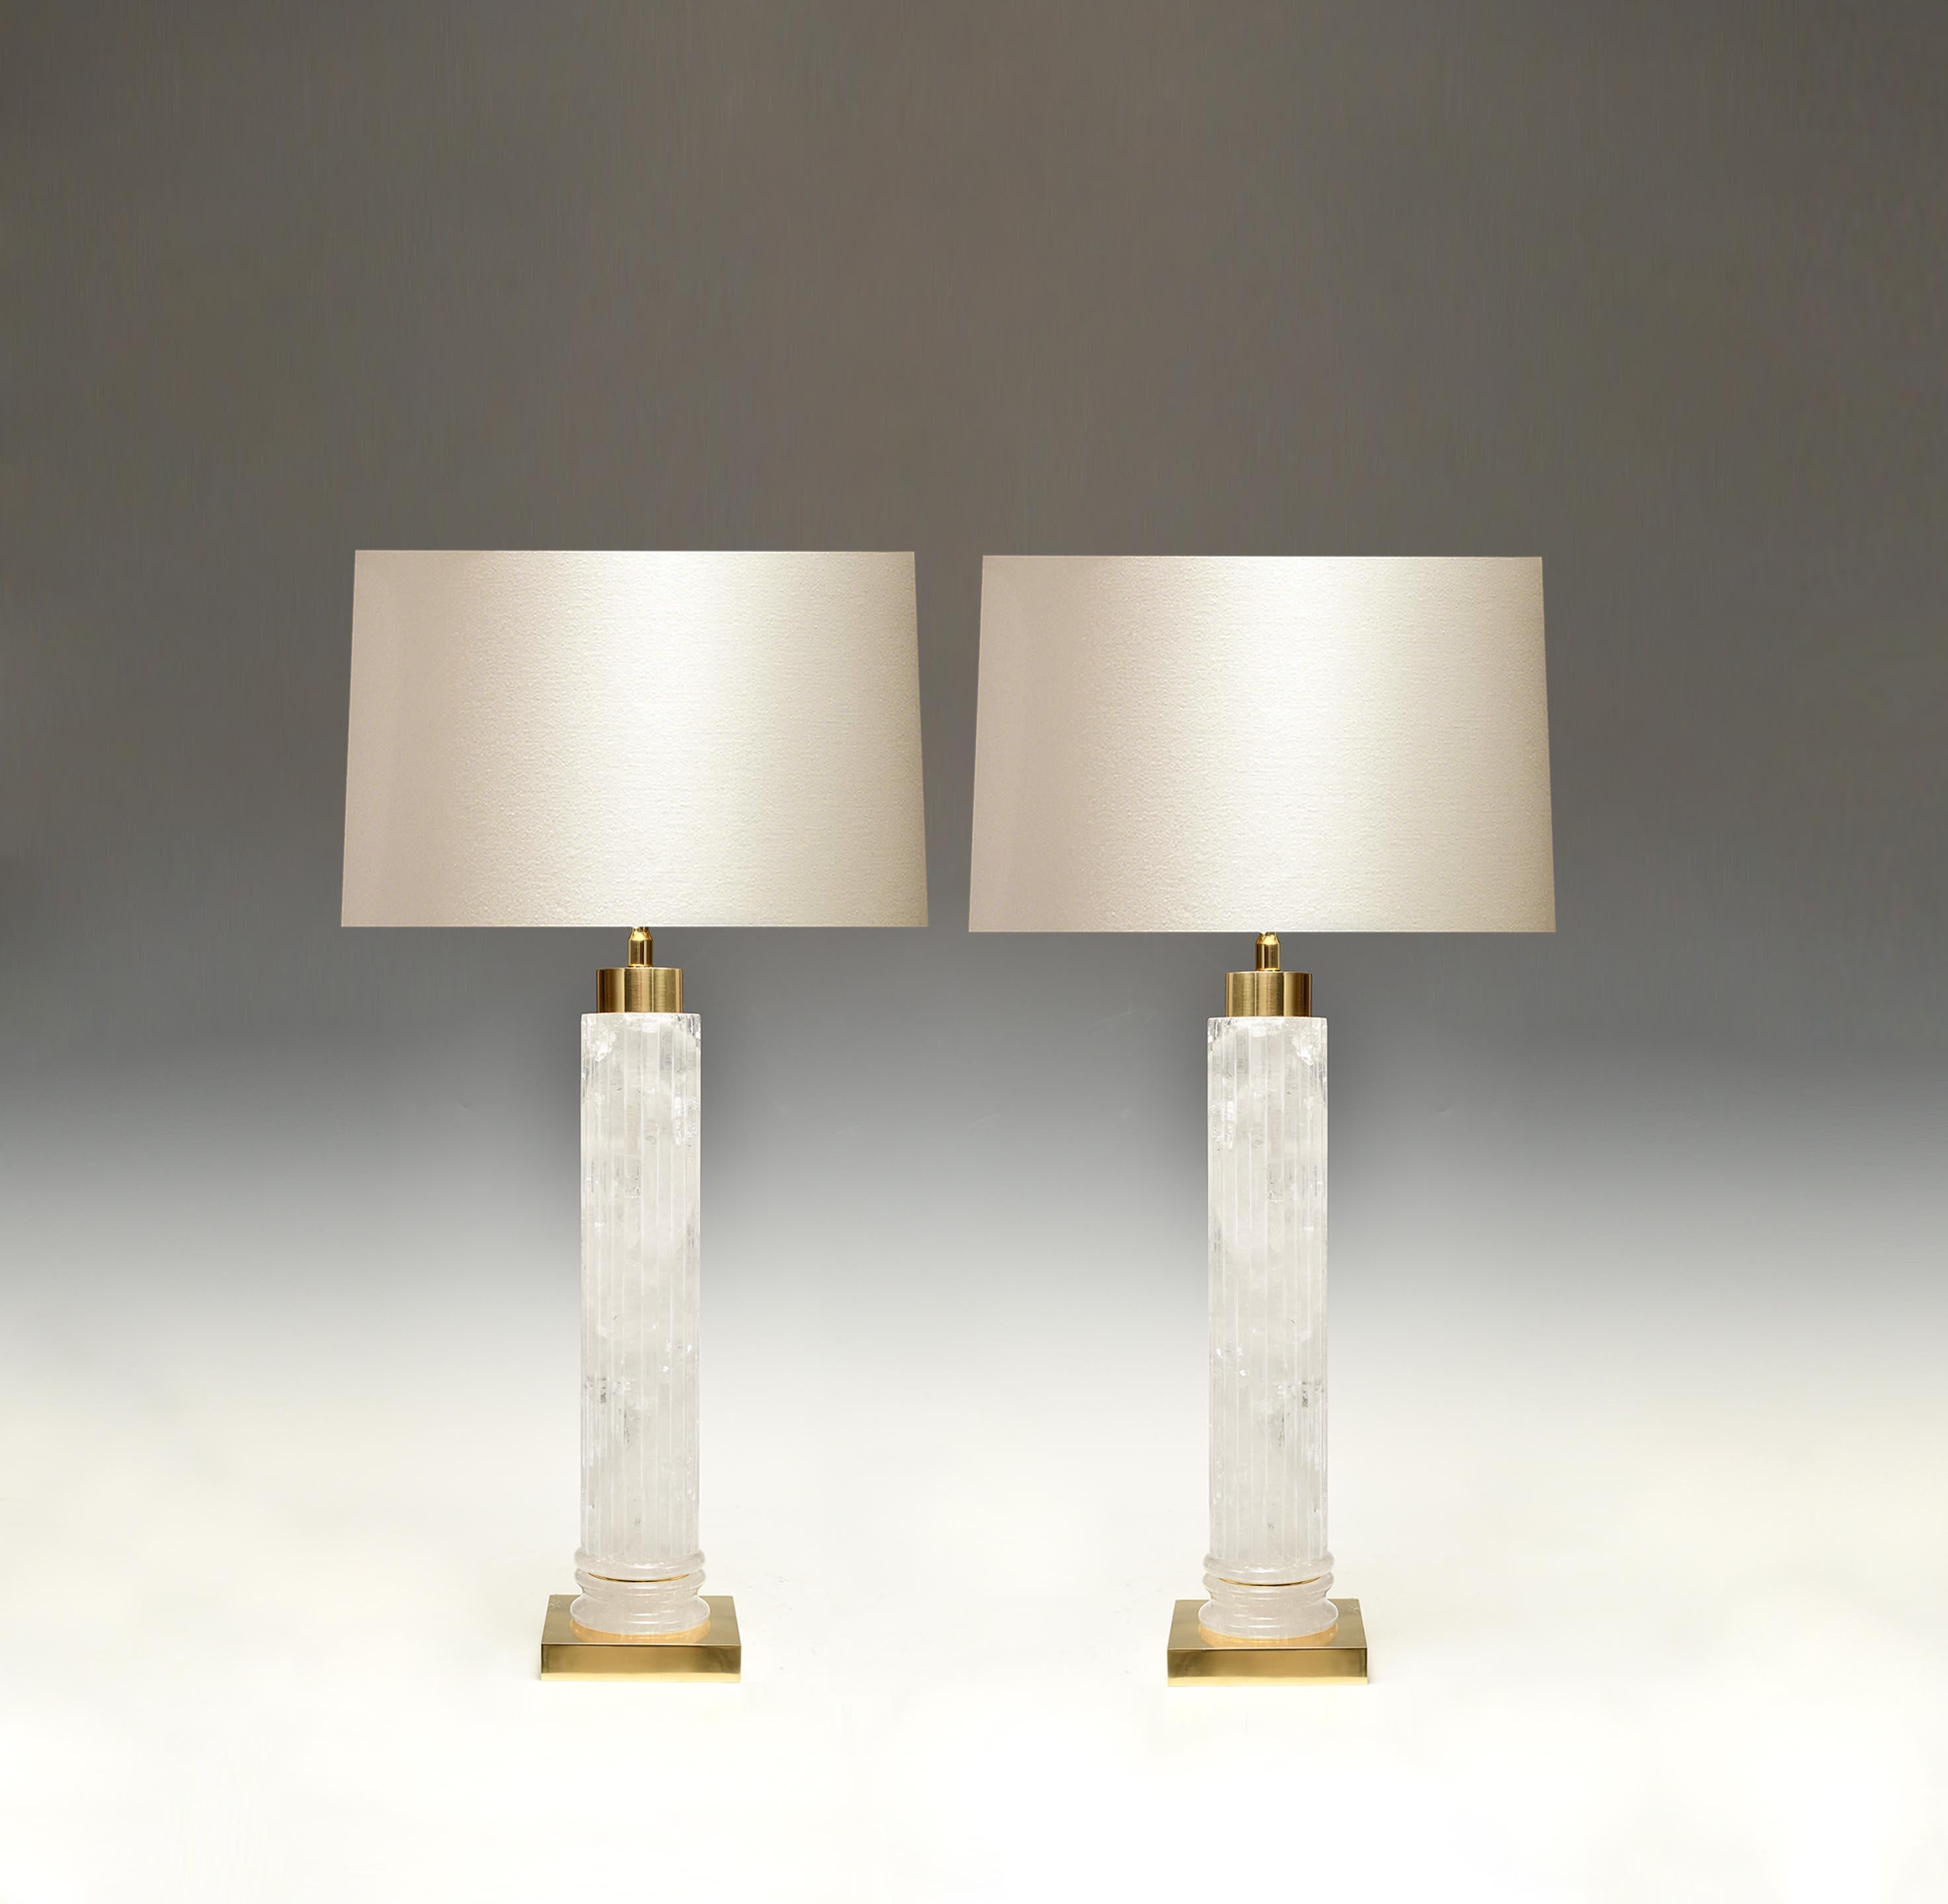 A pair of carved strips cylindrical rock crystal lamps with polished brass bases. Created by Phoenix Gallery.
Each lamp installs two sockets.
To the top of rock crystal: 17